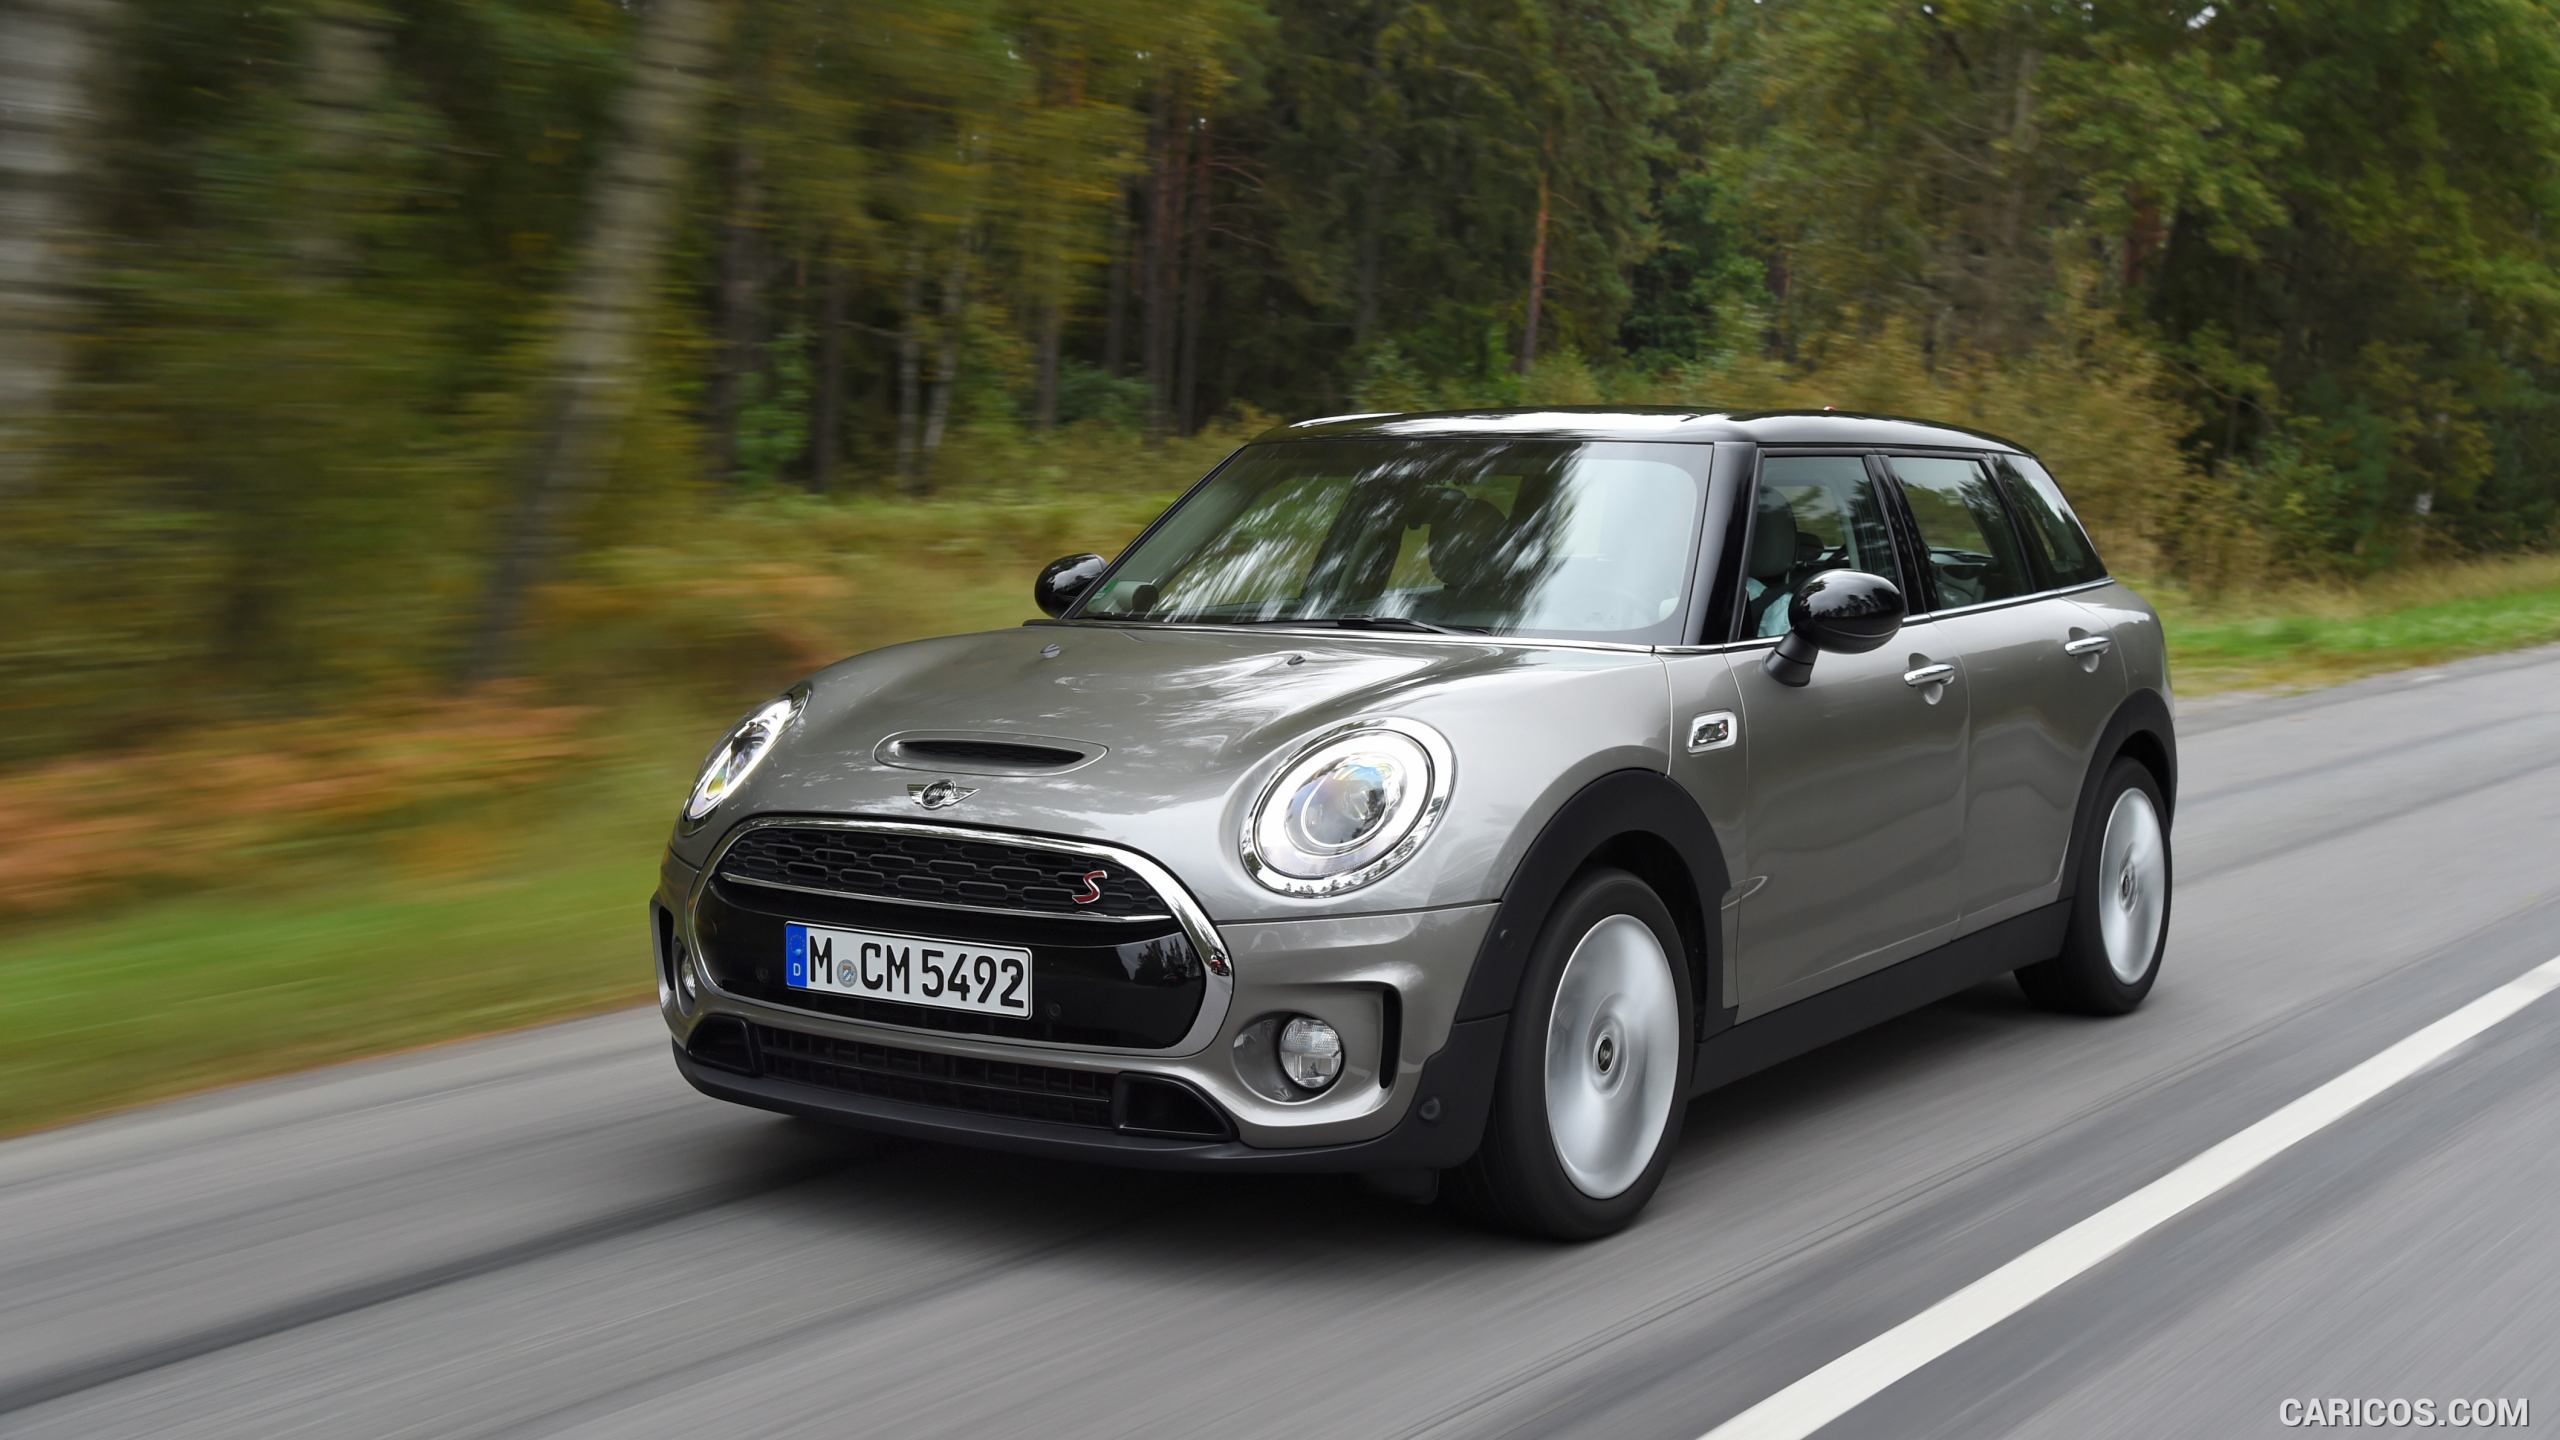 2016 MINI Cooper S Clubman in Metallic Melting Silver - Front, #114 of 380